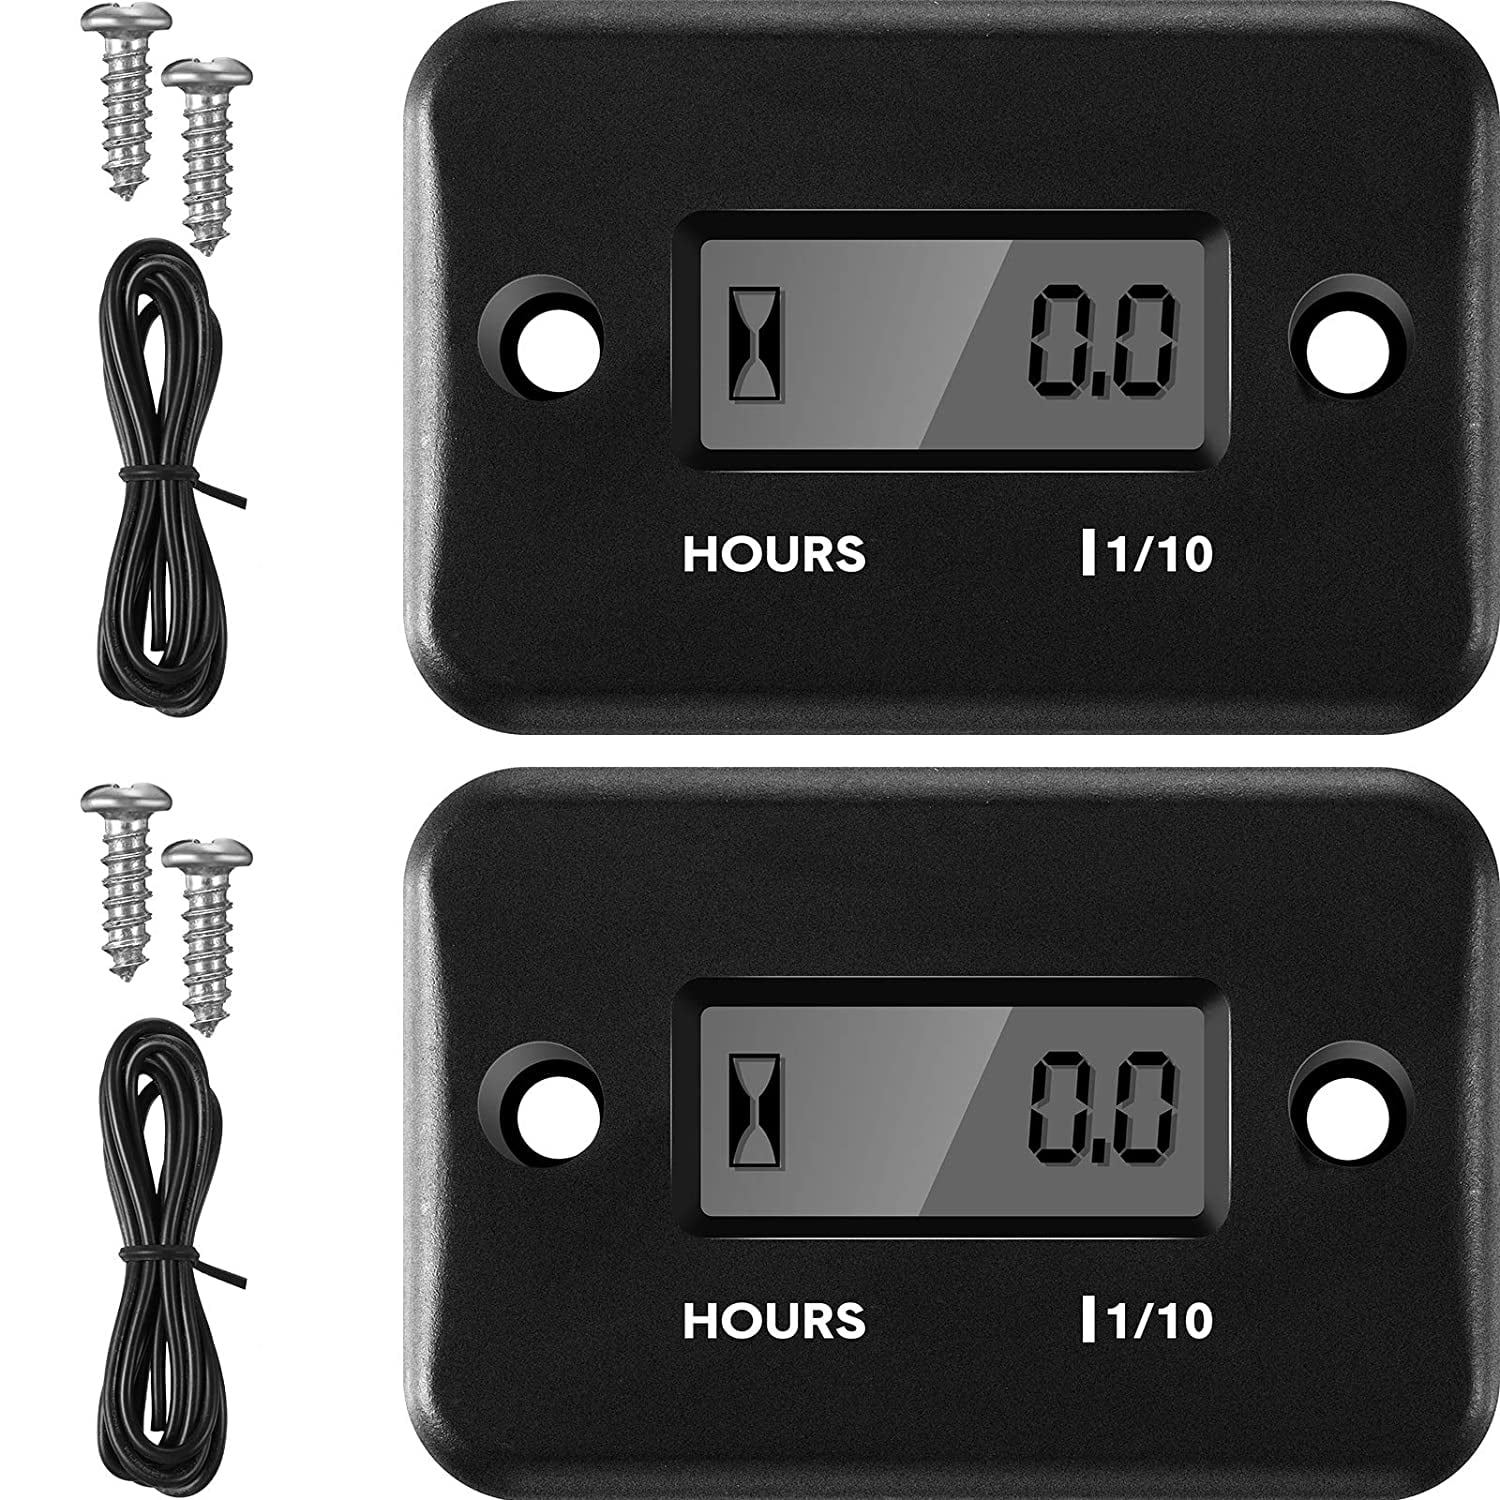 Blue 2 Pieces Inductive Hour Meters Digital Engine Meter Automatically Shutdown Tachometers Small Hour Tachometers for Motorcycle Lawn Mower Generator Chainsaws